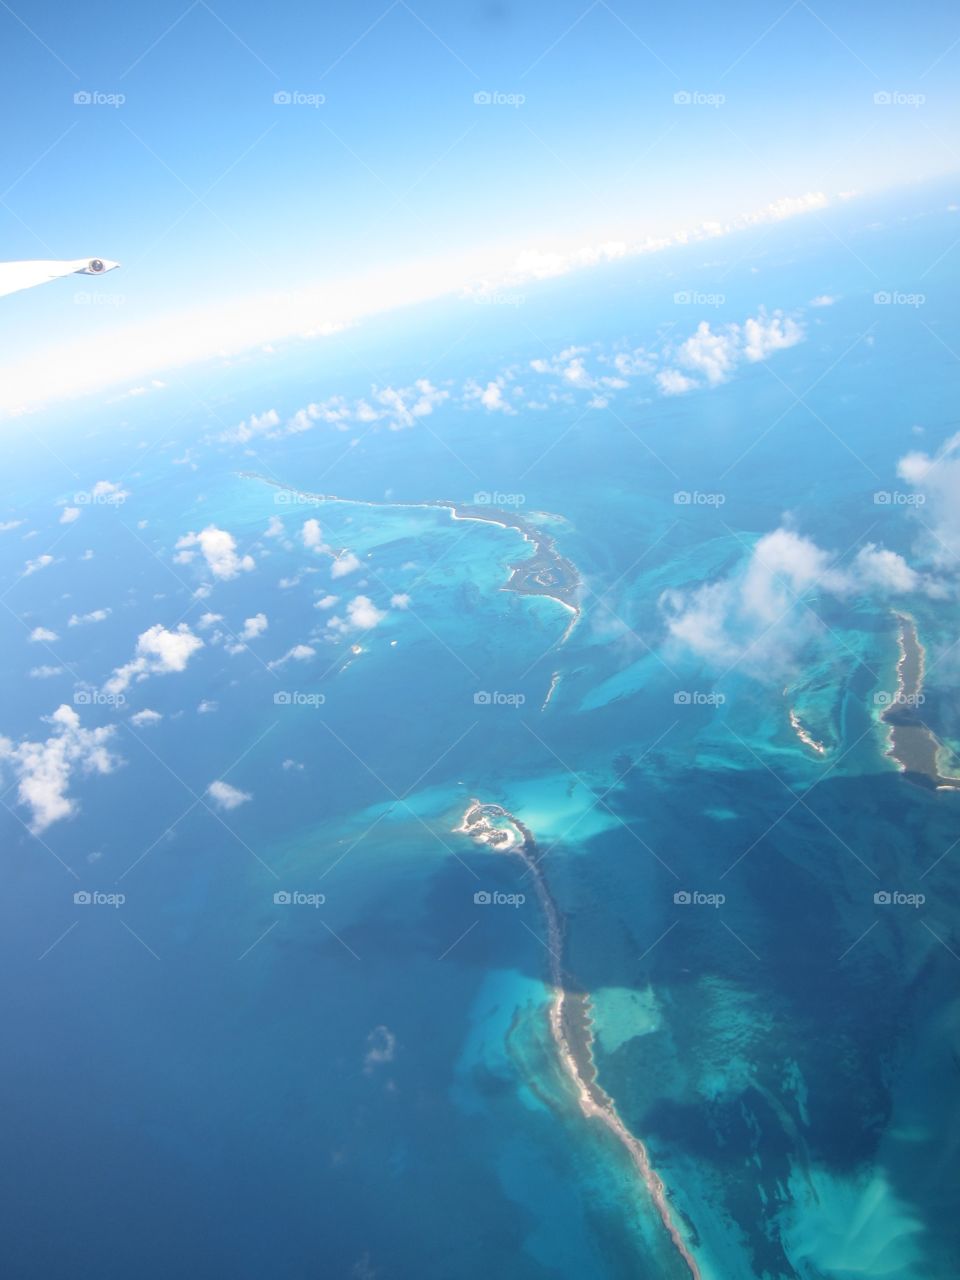 Over Bimini. I'm headed back from Nassau  and I see my next trip location so nice.